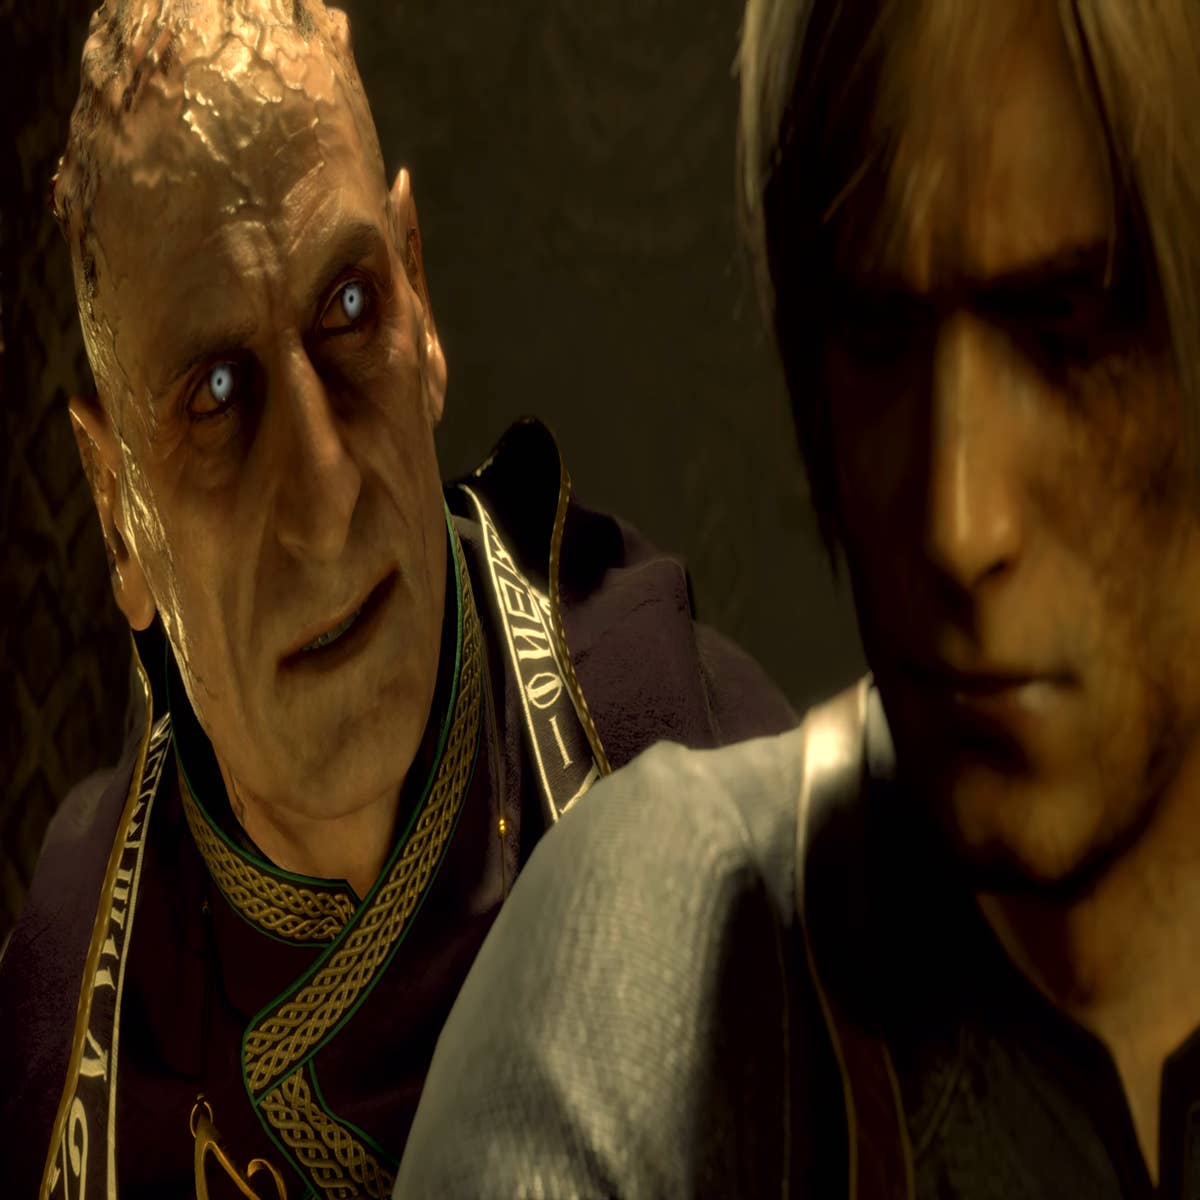 Resident Evil 4 remake differences: 17 changes from the original